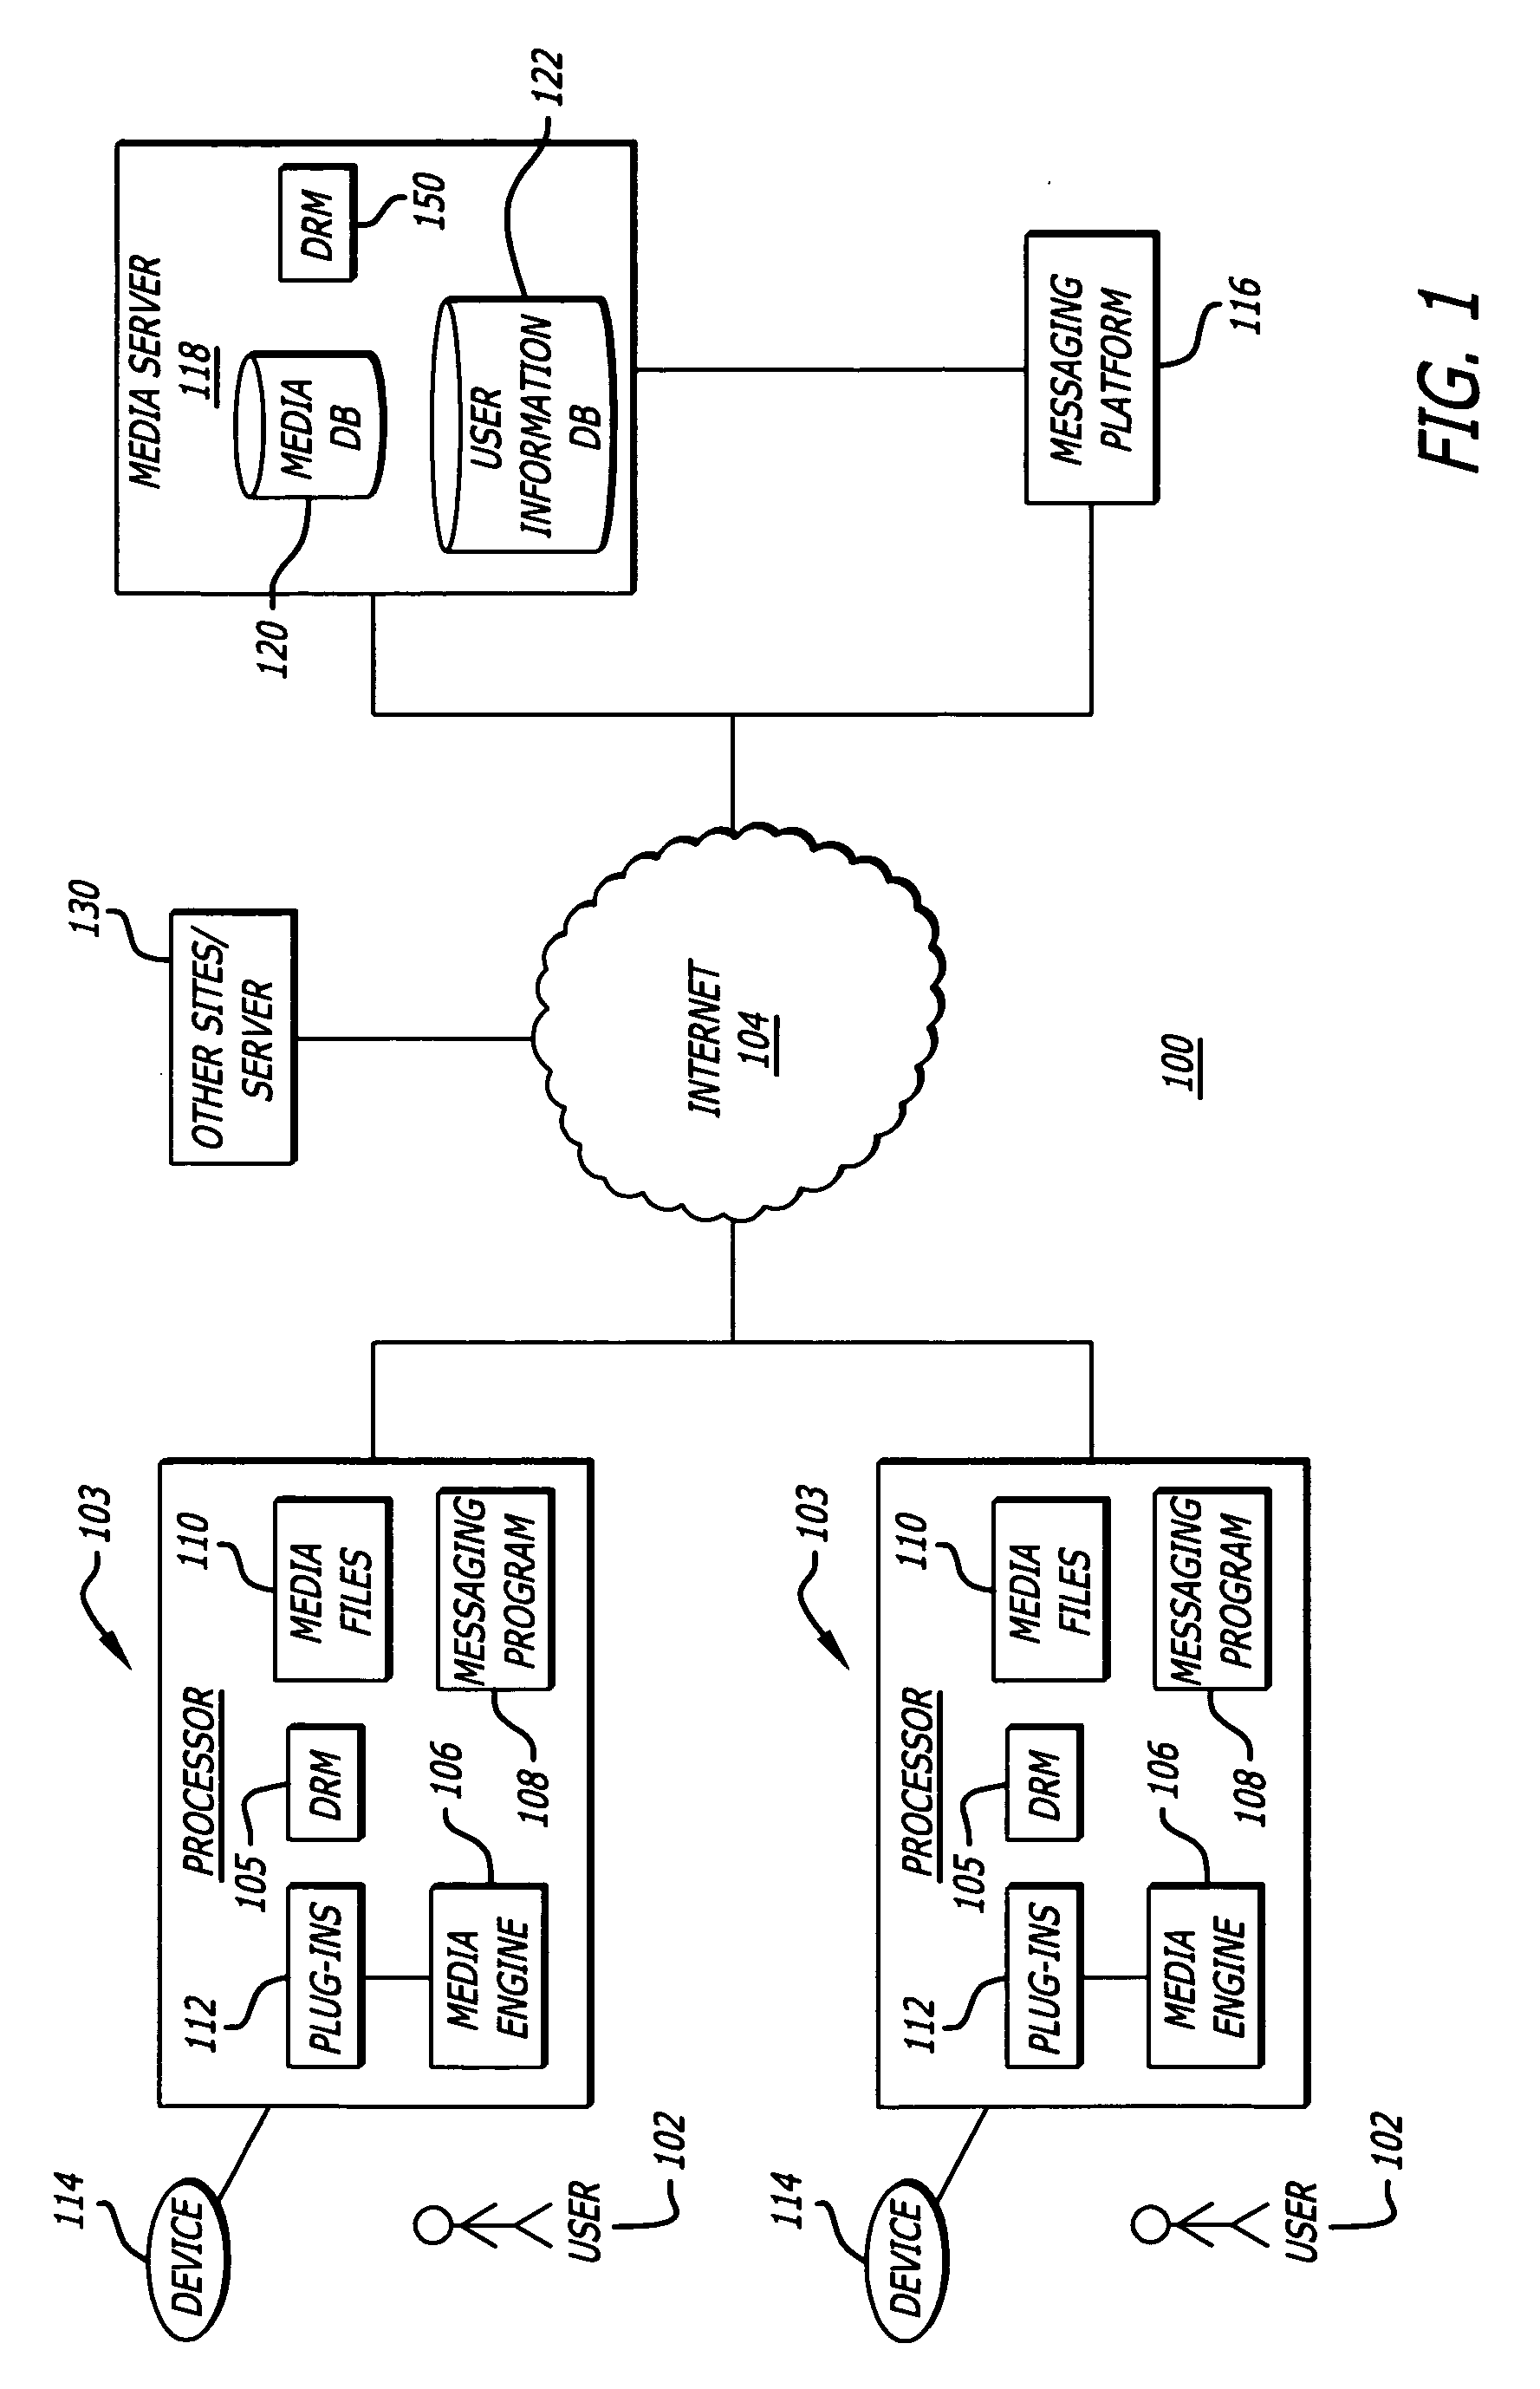 System and method for playlist management and distribution